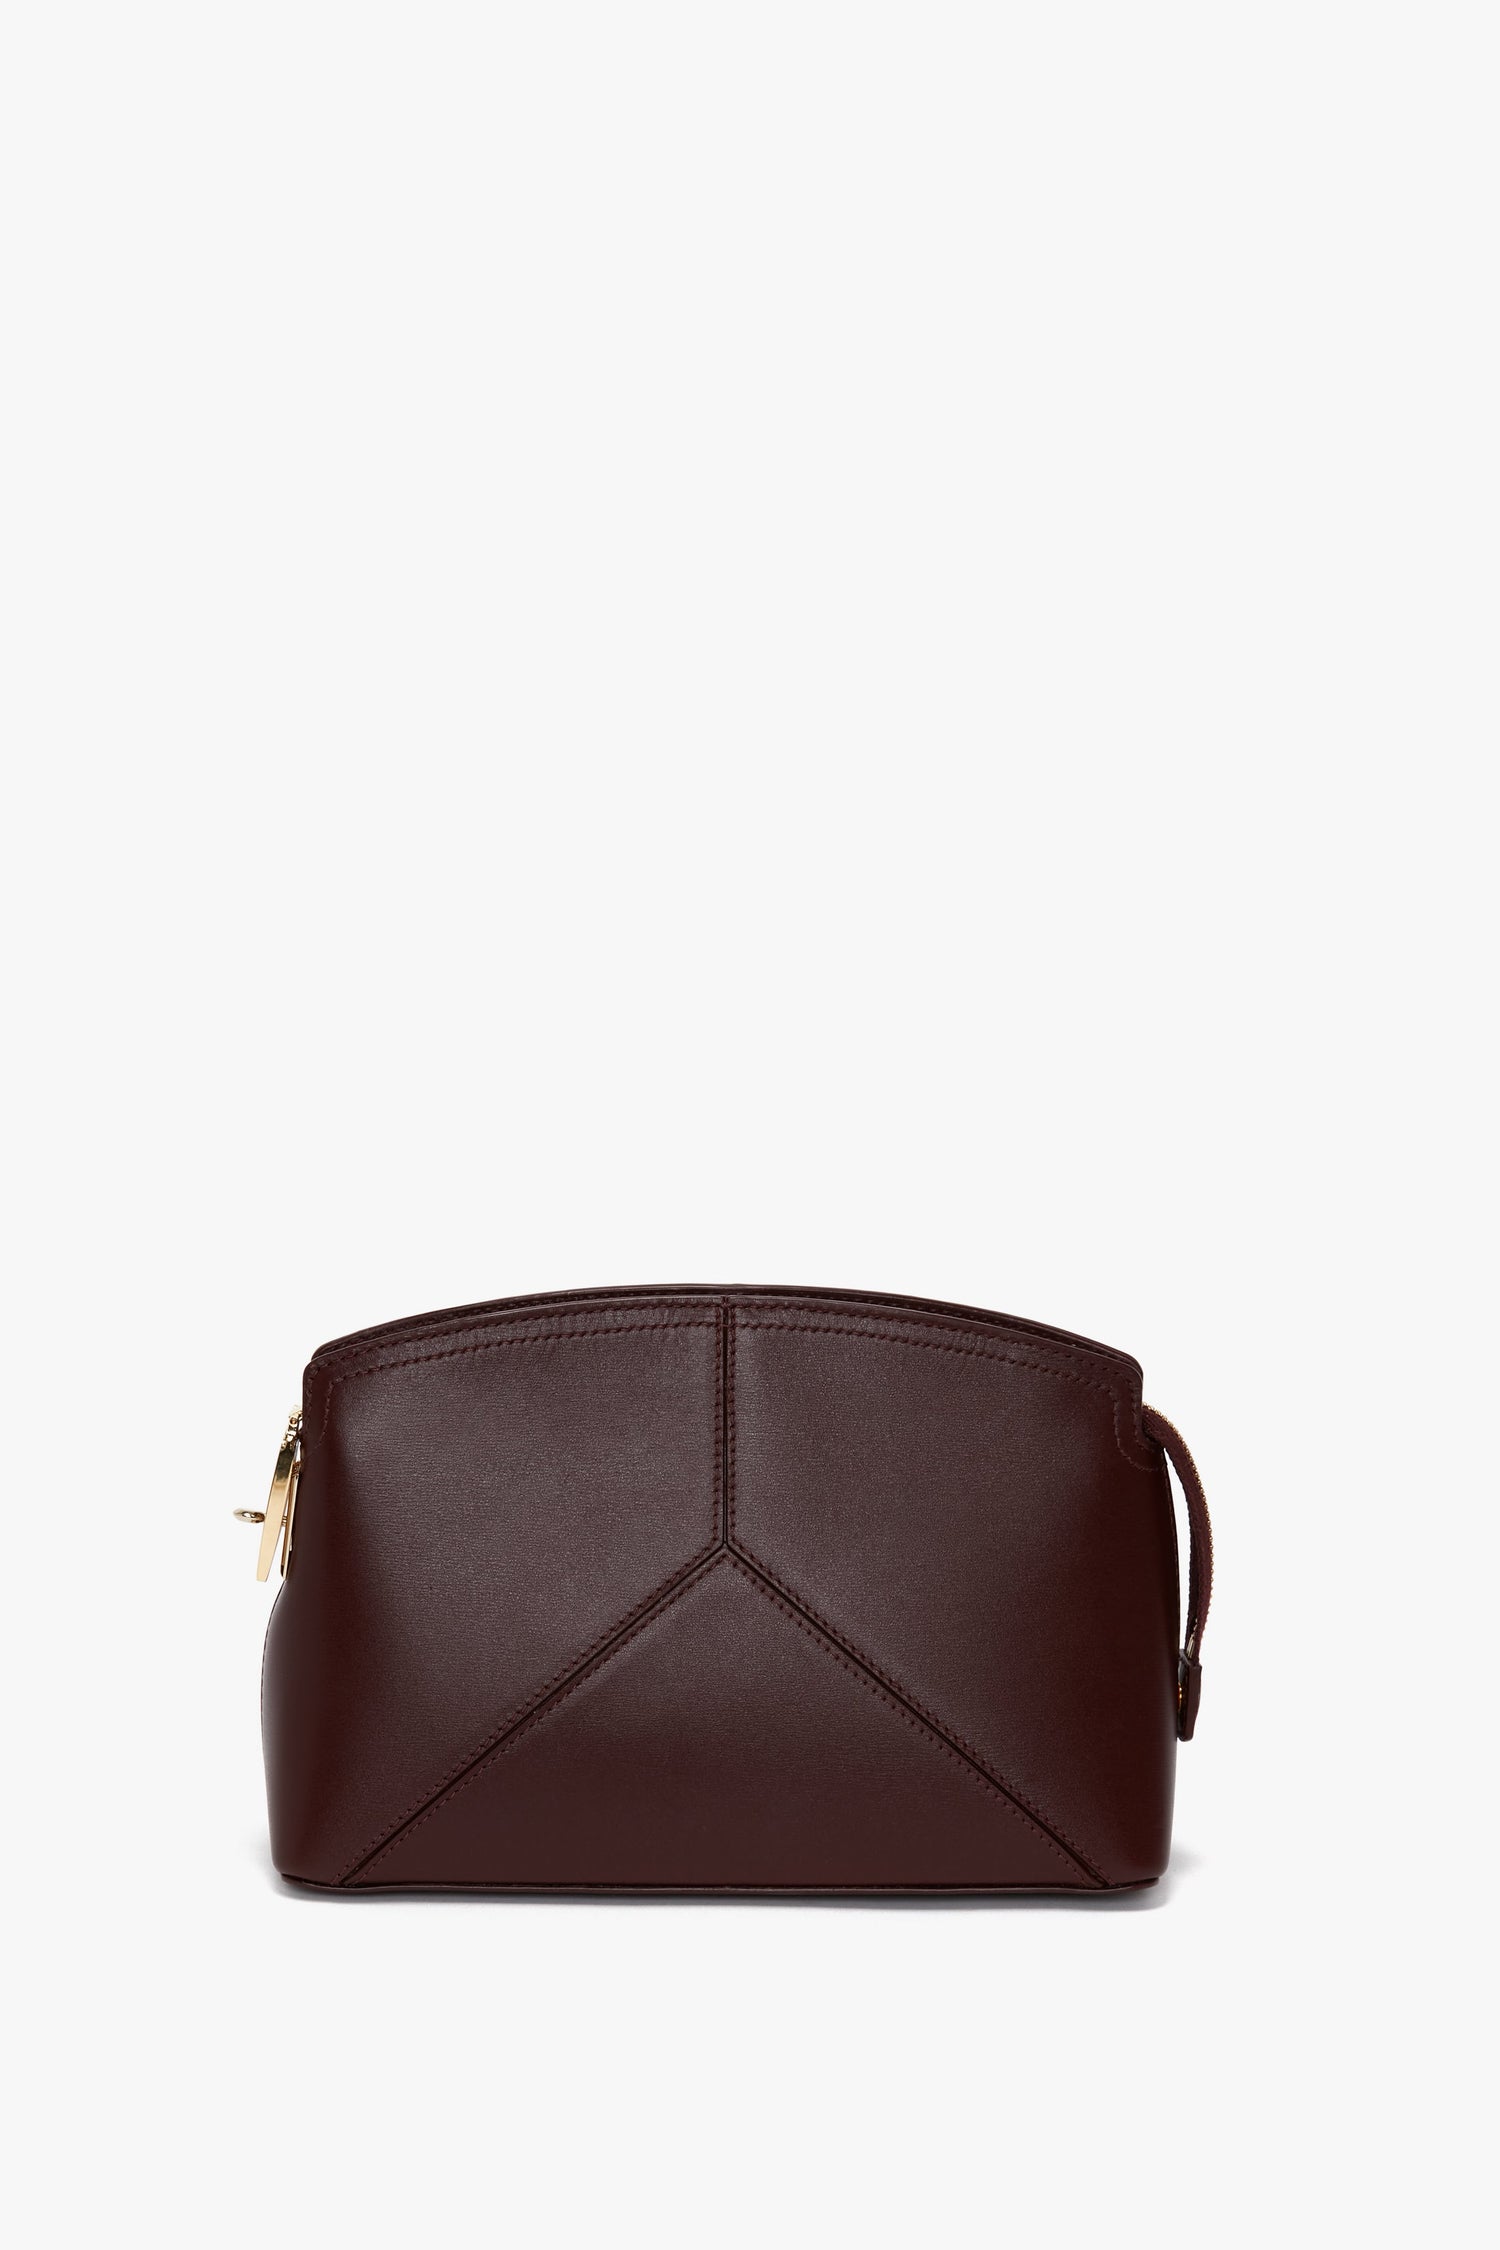 A Victoria Crossbody Bag In Burgundy Leather by Victoria Beckham, crafted from textured calf leather with a geometric design and a gold zipper, rests on a white background.